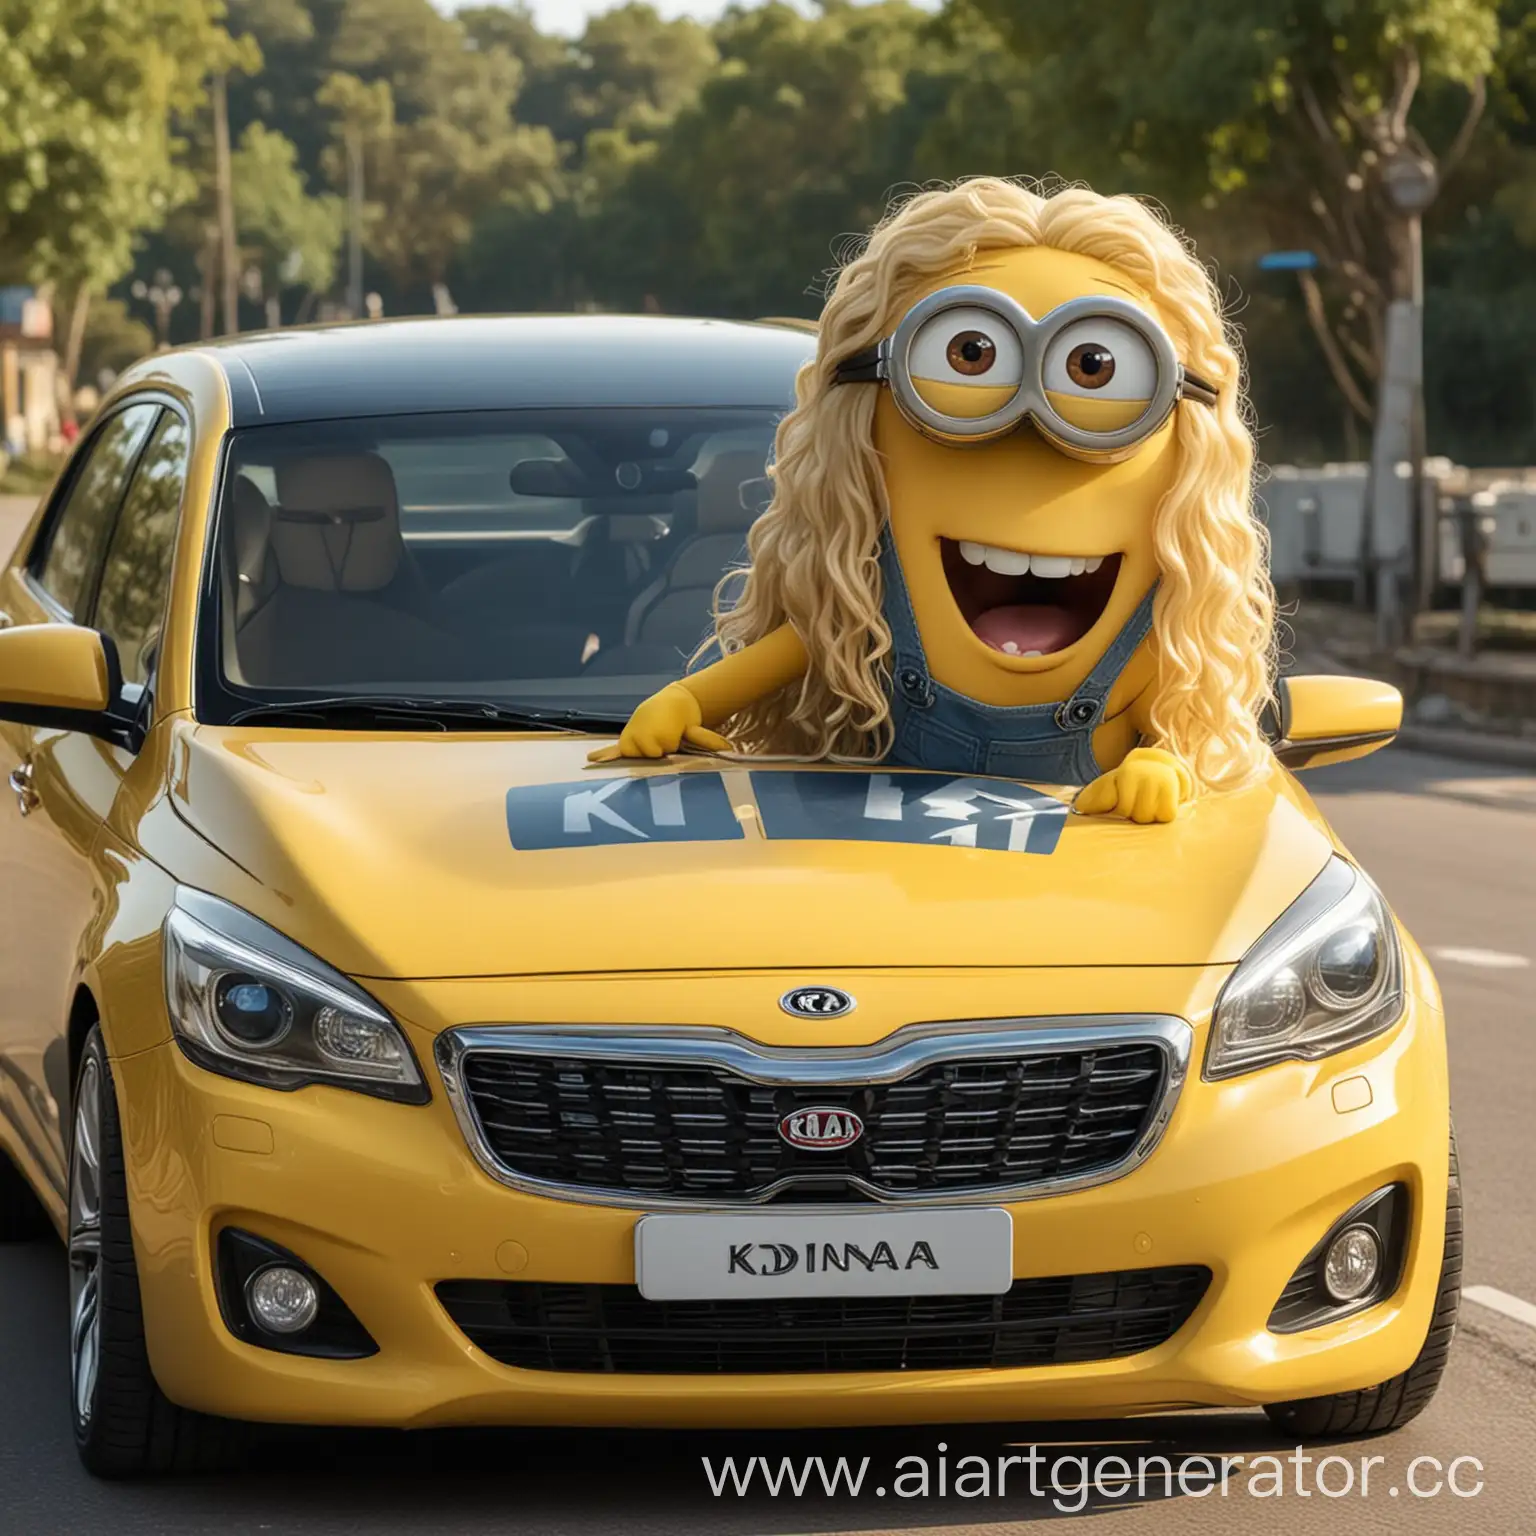 Minion-with-Long-Blonde-Curly-Hair-Sitting-on-DianaK5-Car